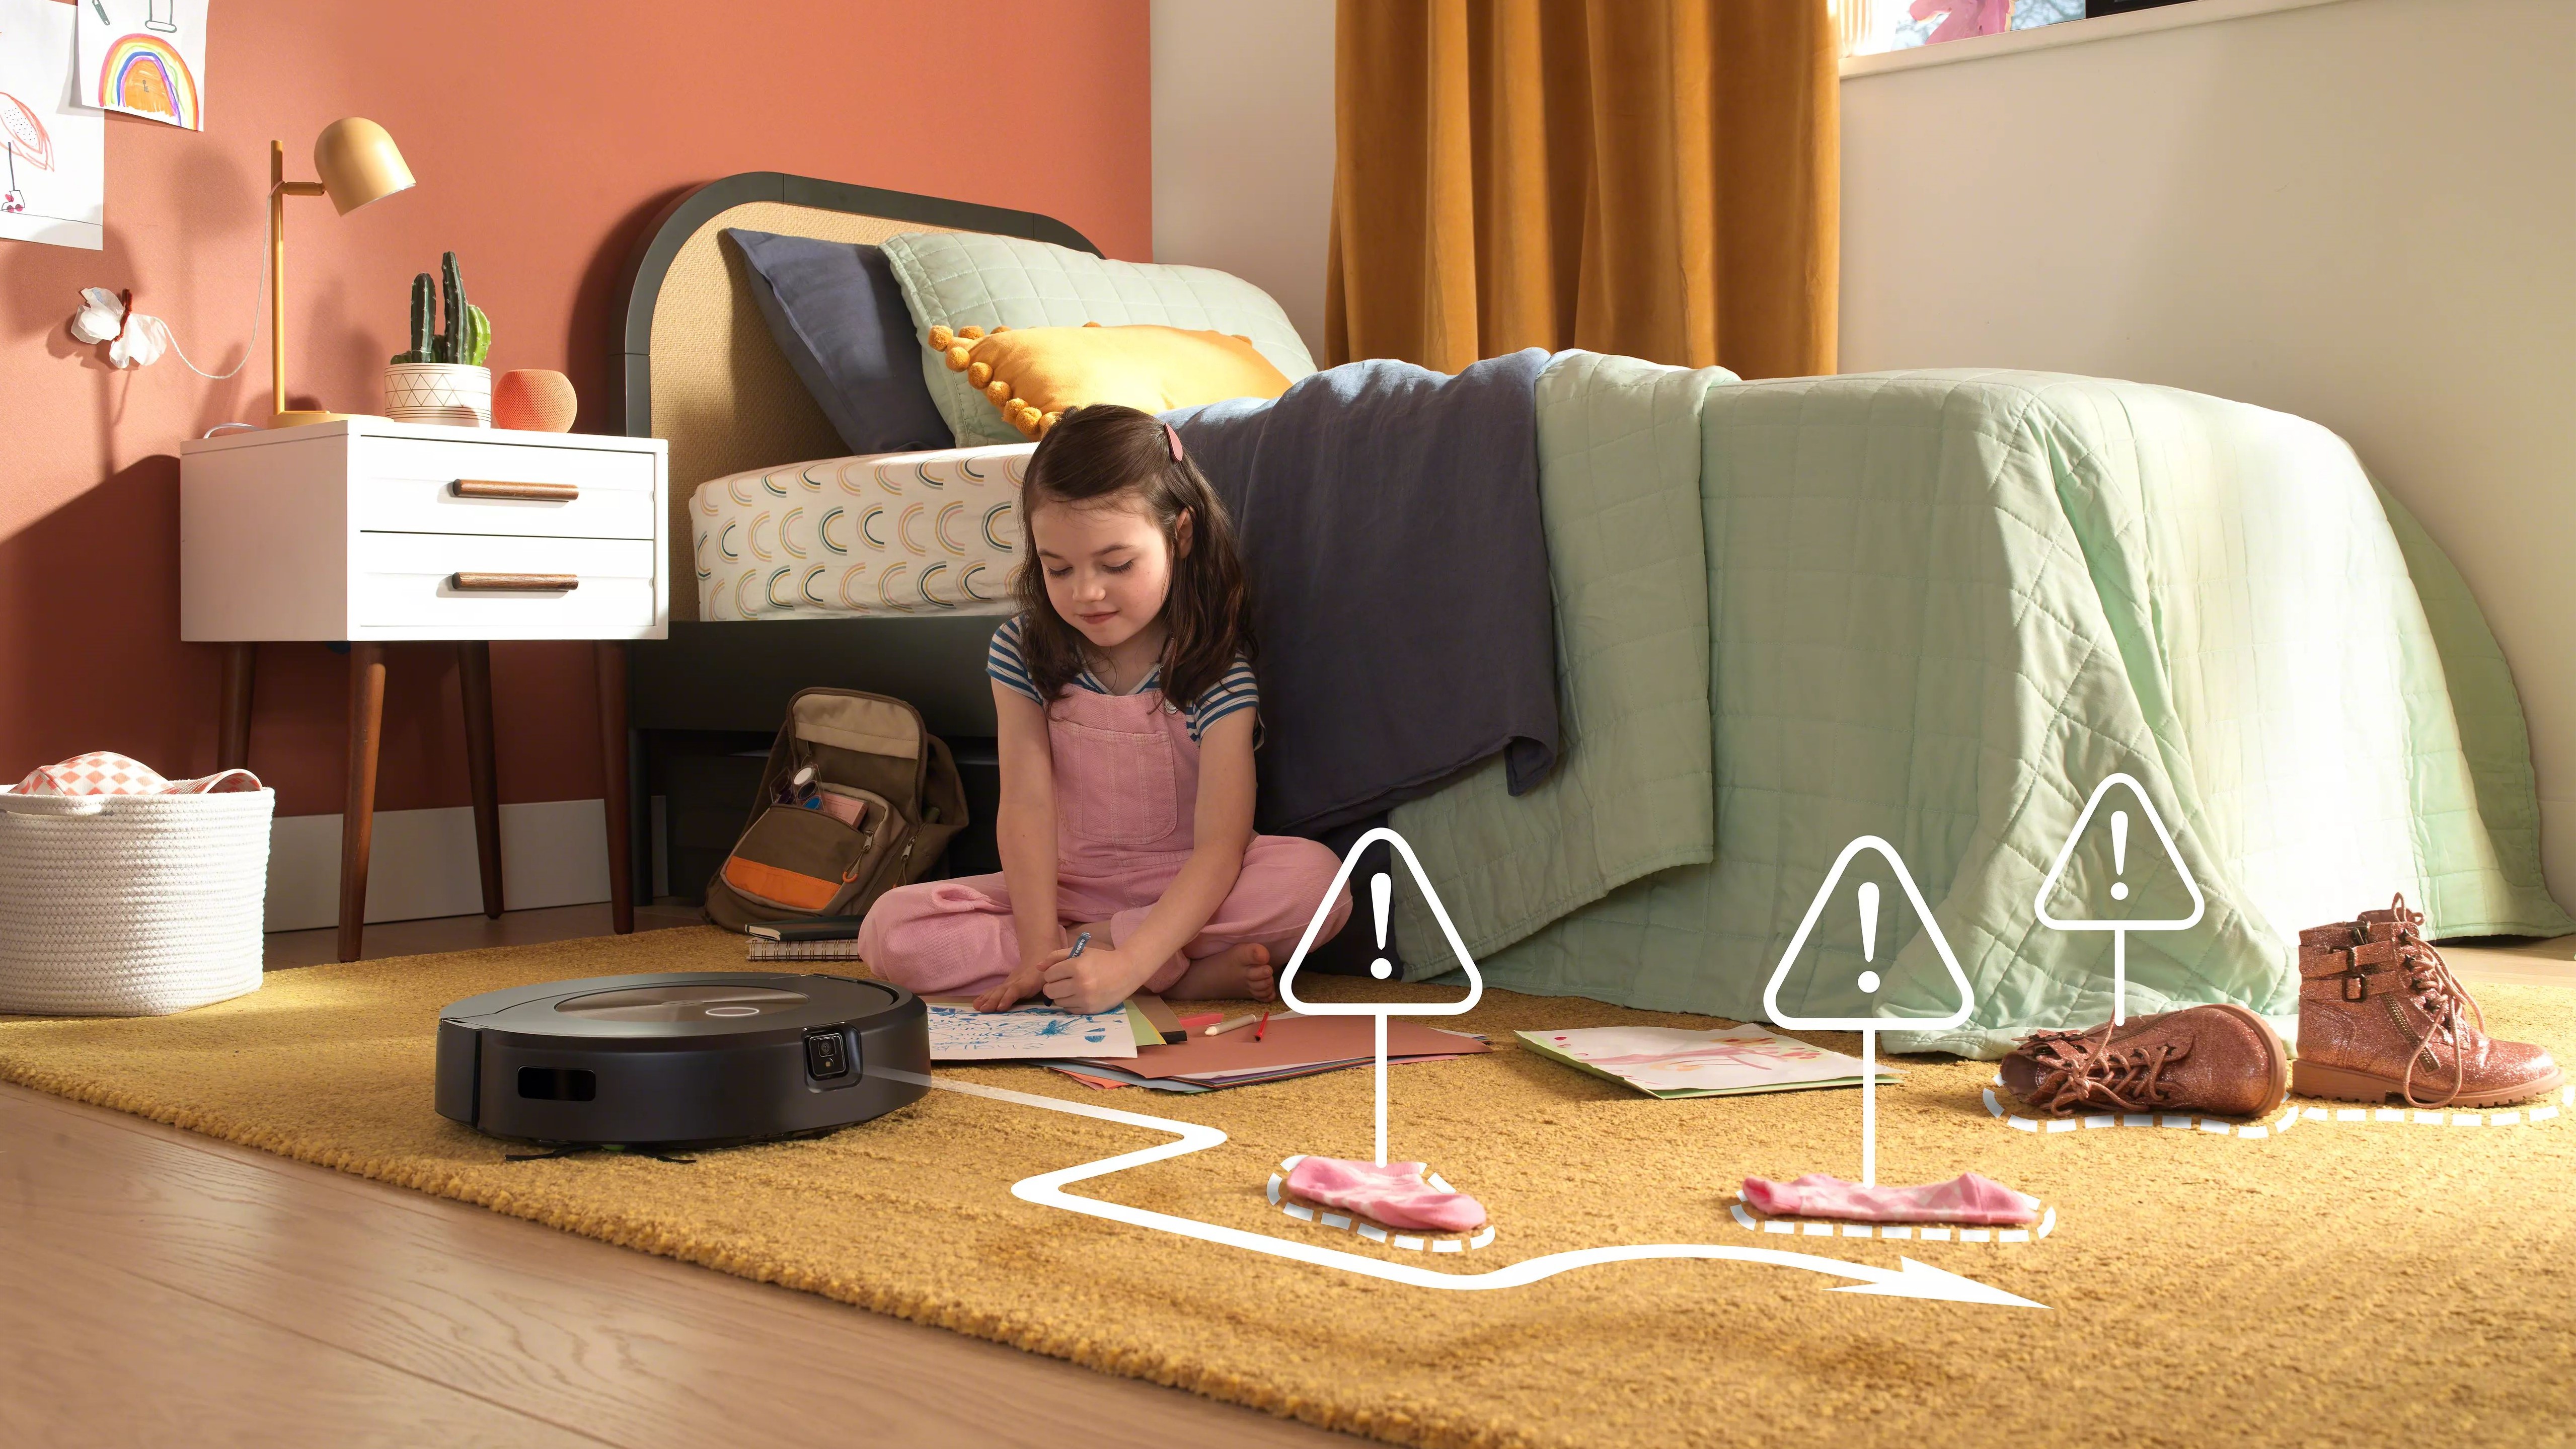 A Roomba j9+ navigating a child's room which has socks and boots strewn over it - and a girl drawing on the floor.